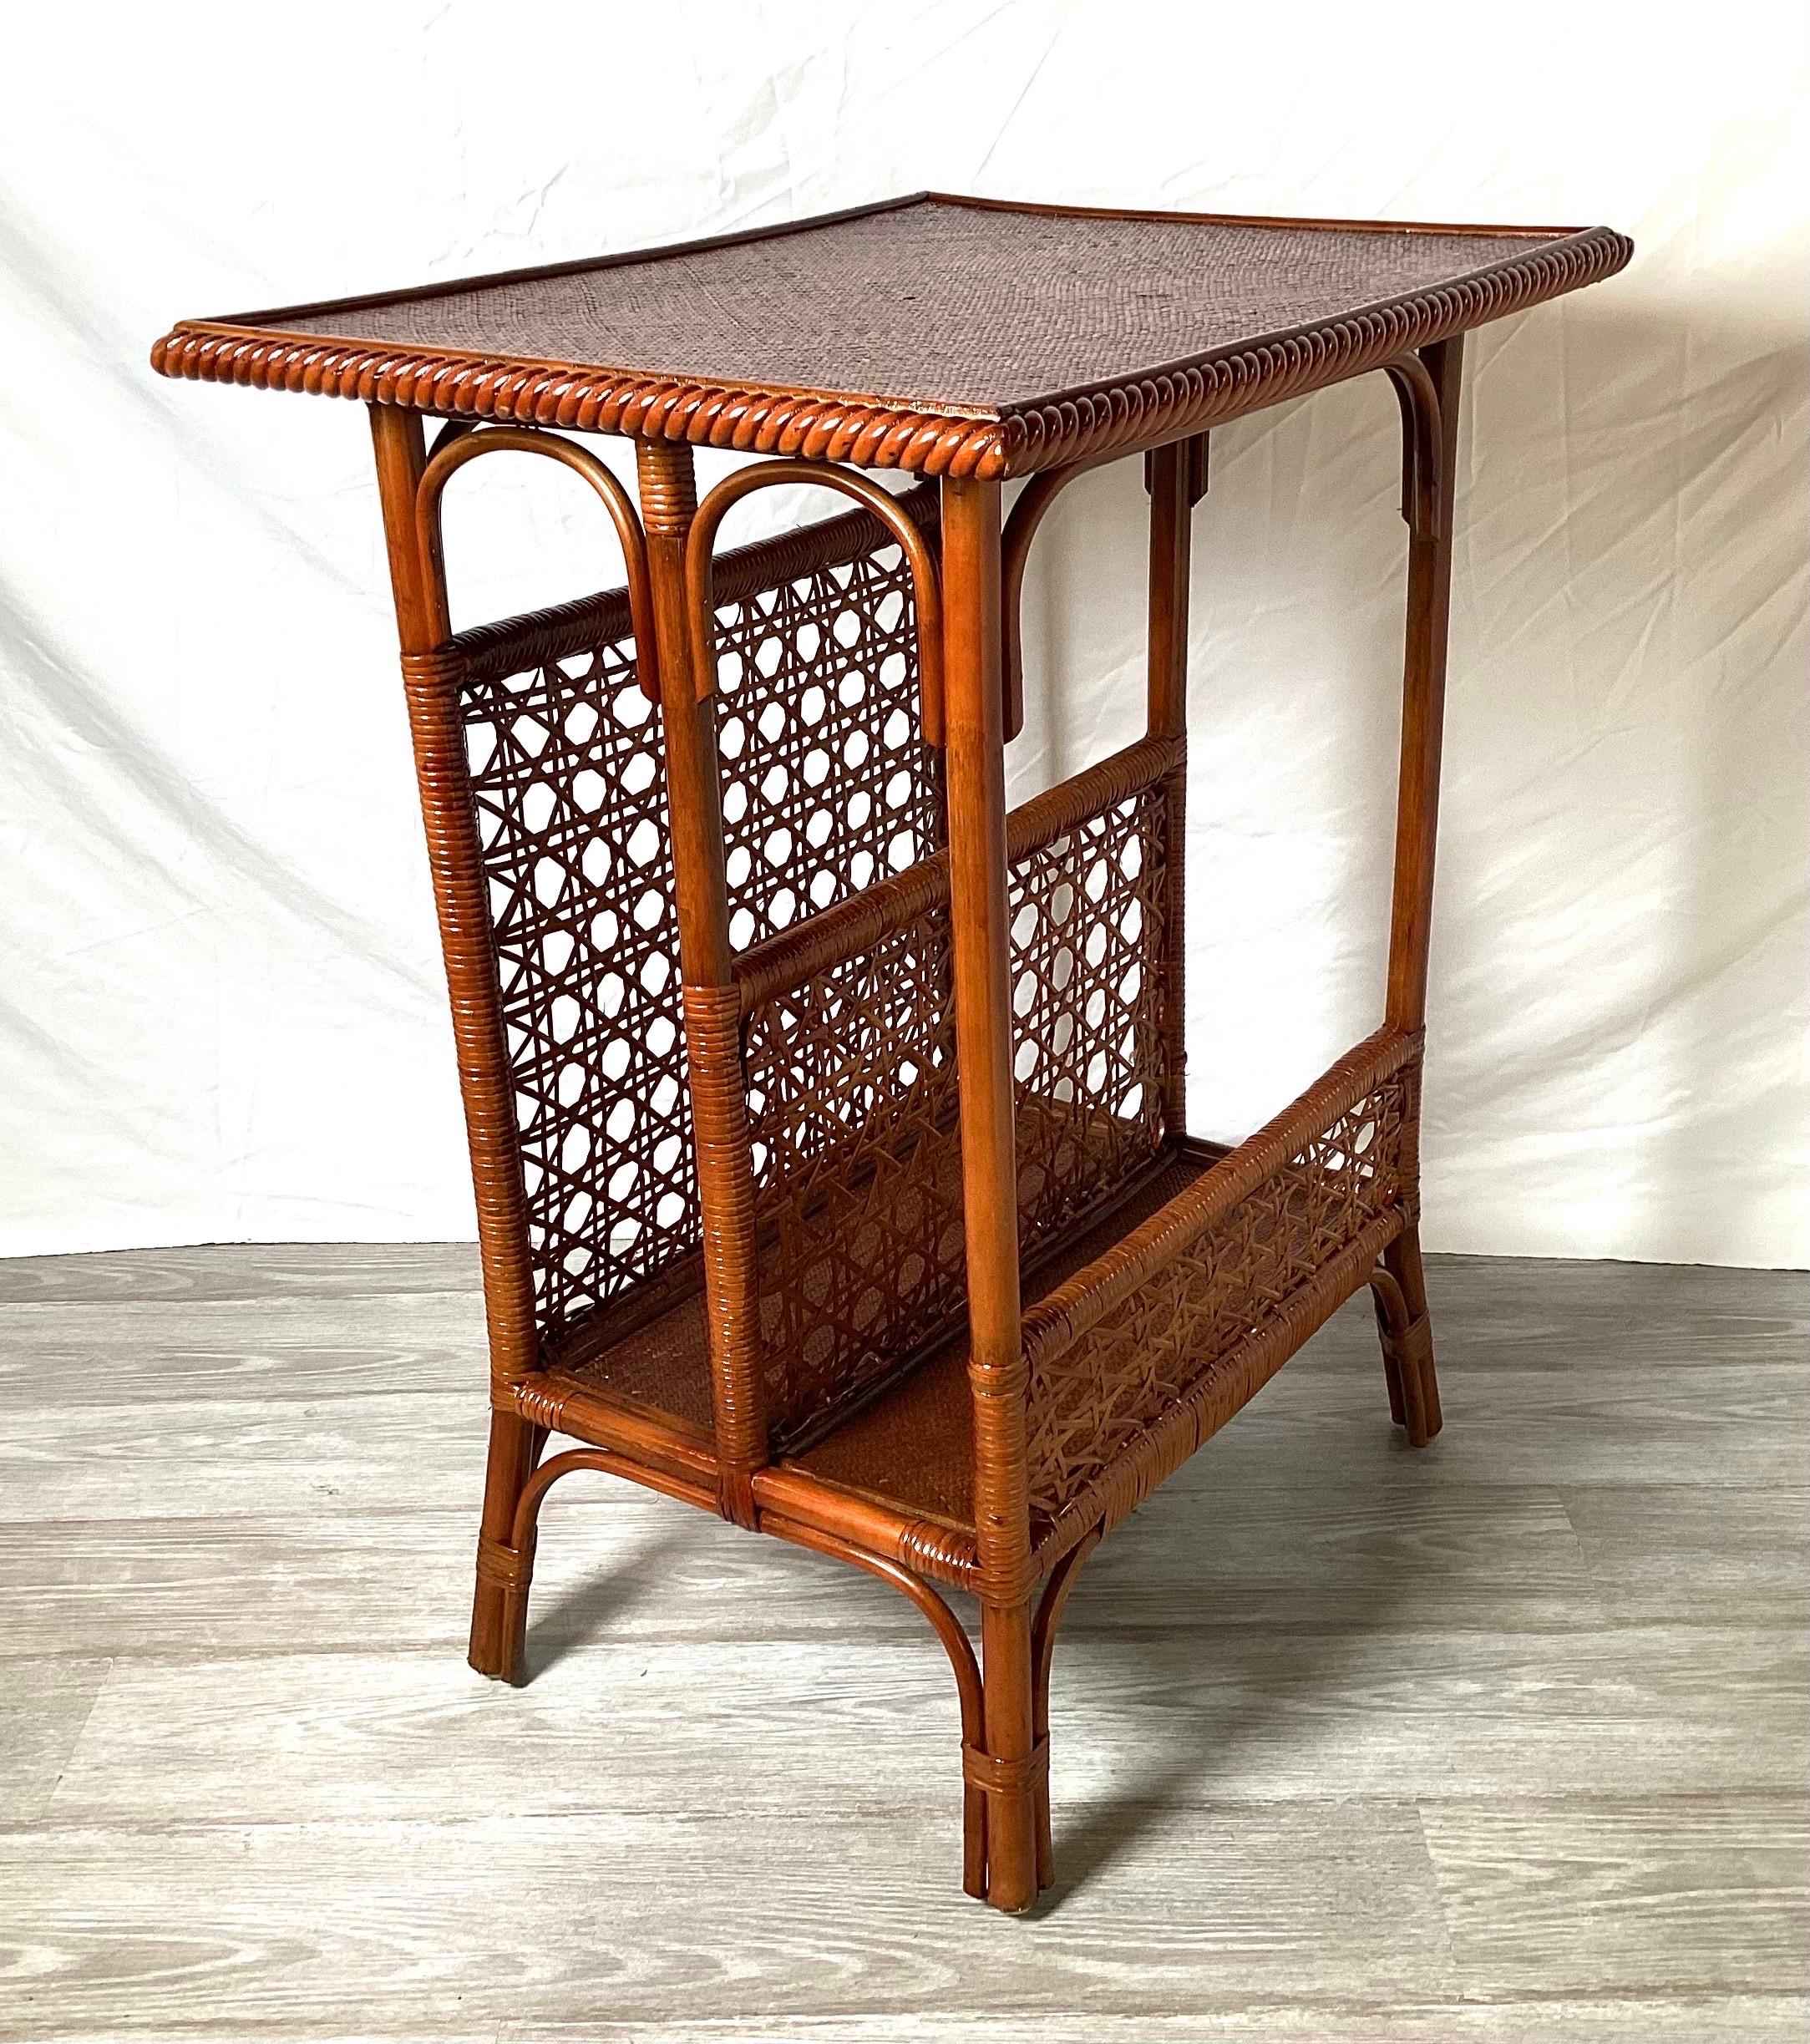 An early 20th century Bamboo side table for storage and reading material. The rectangular top with side compartments with caned sides resting on four bamboo feet. The top is wood covered in woven split bamboo strips. The entire surface has been